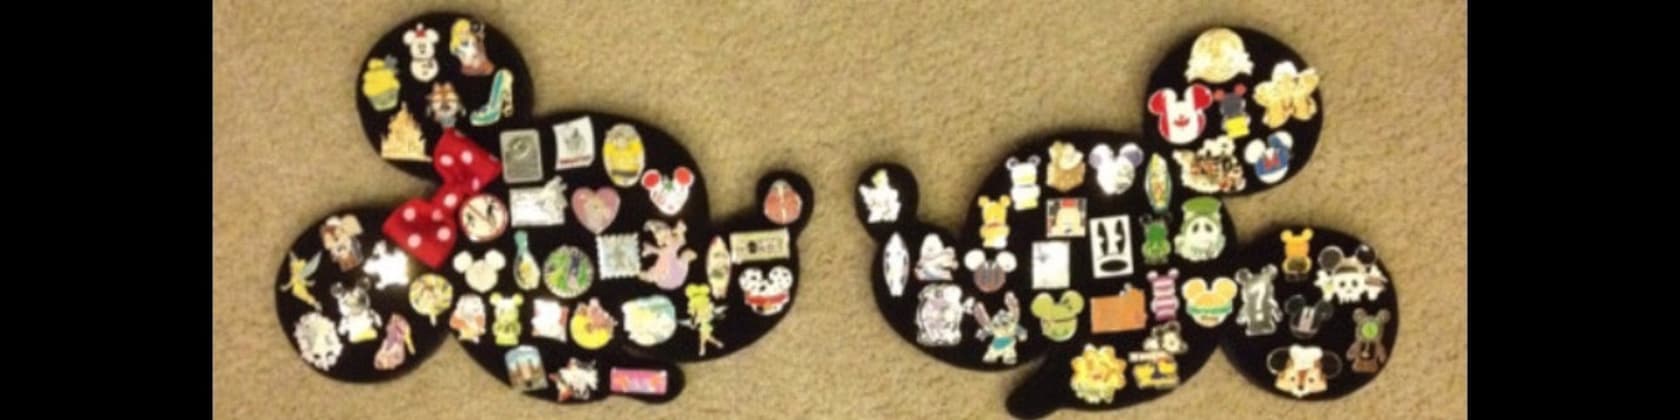 16 Tall Set Mickey & Minnie Mouse Disney Pin Board, Hold About 80